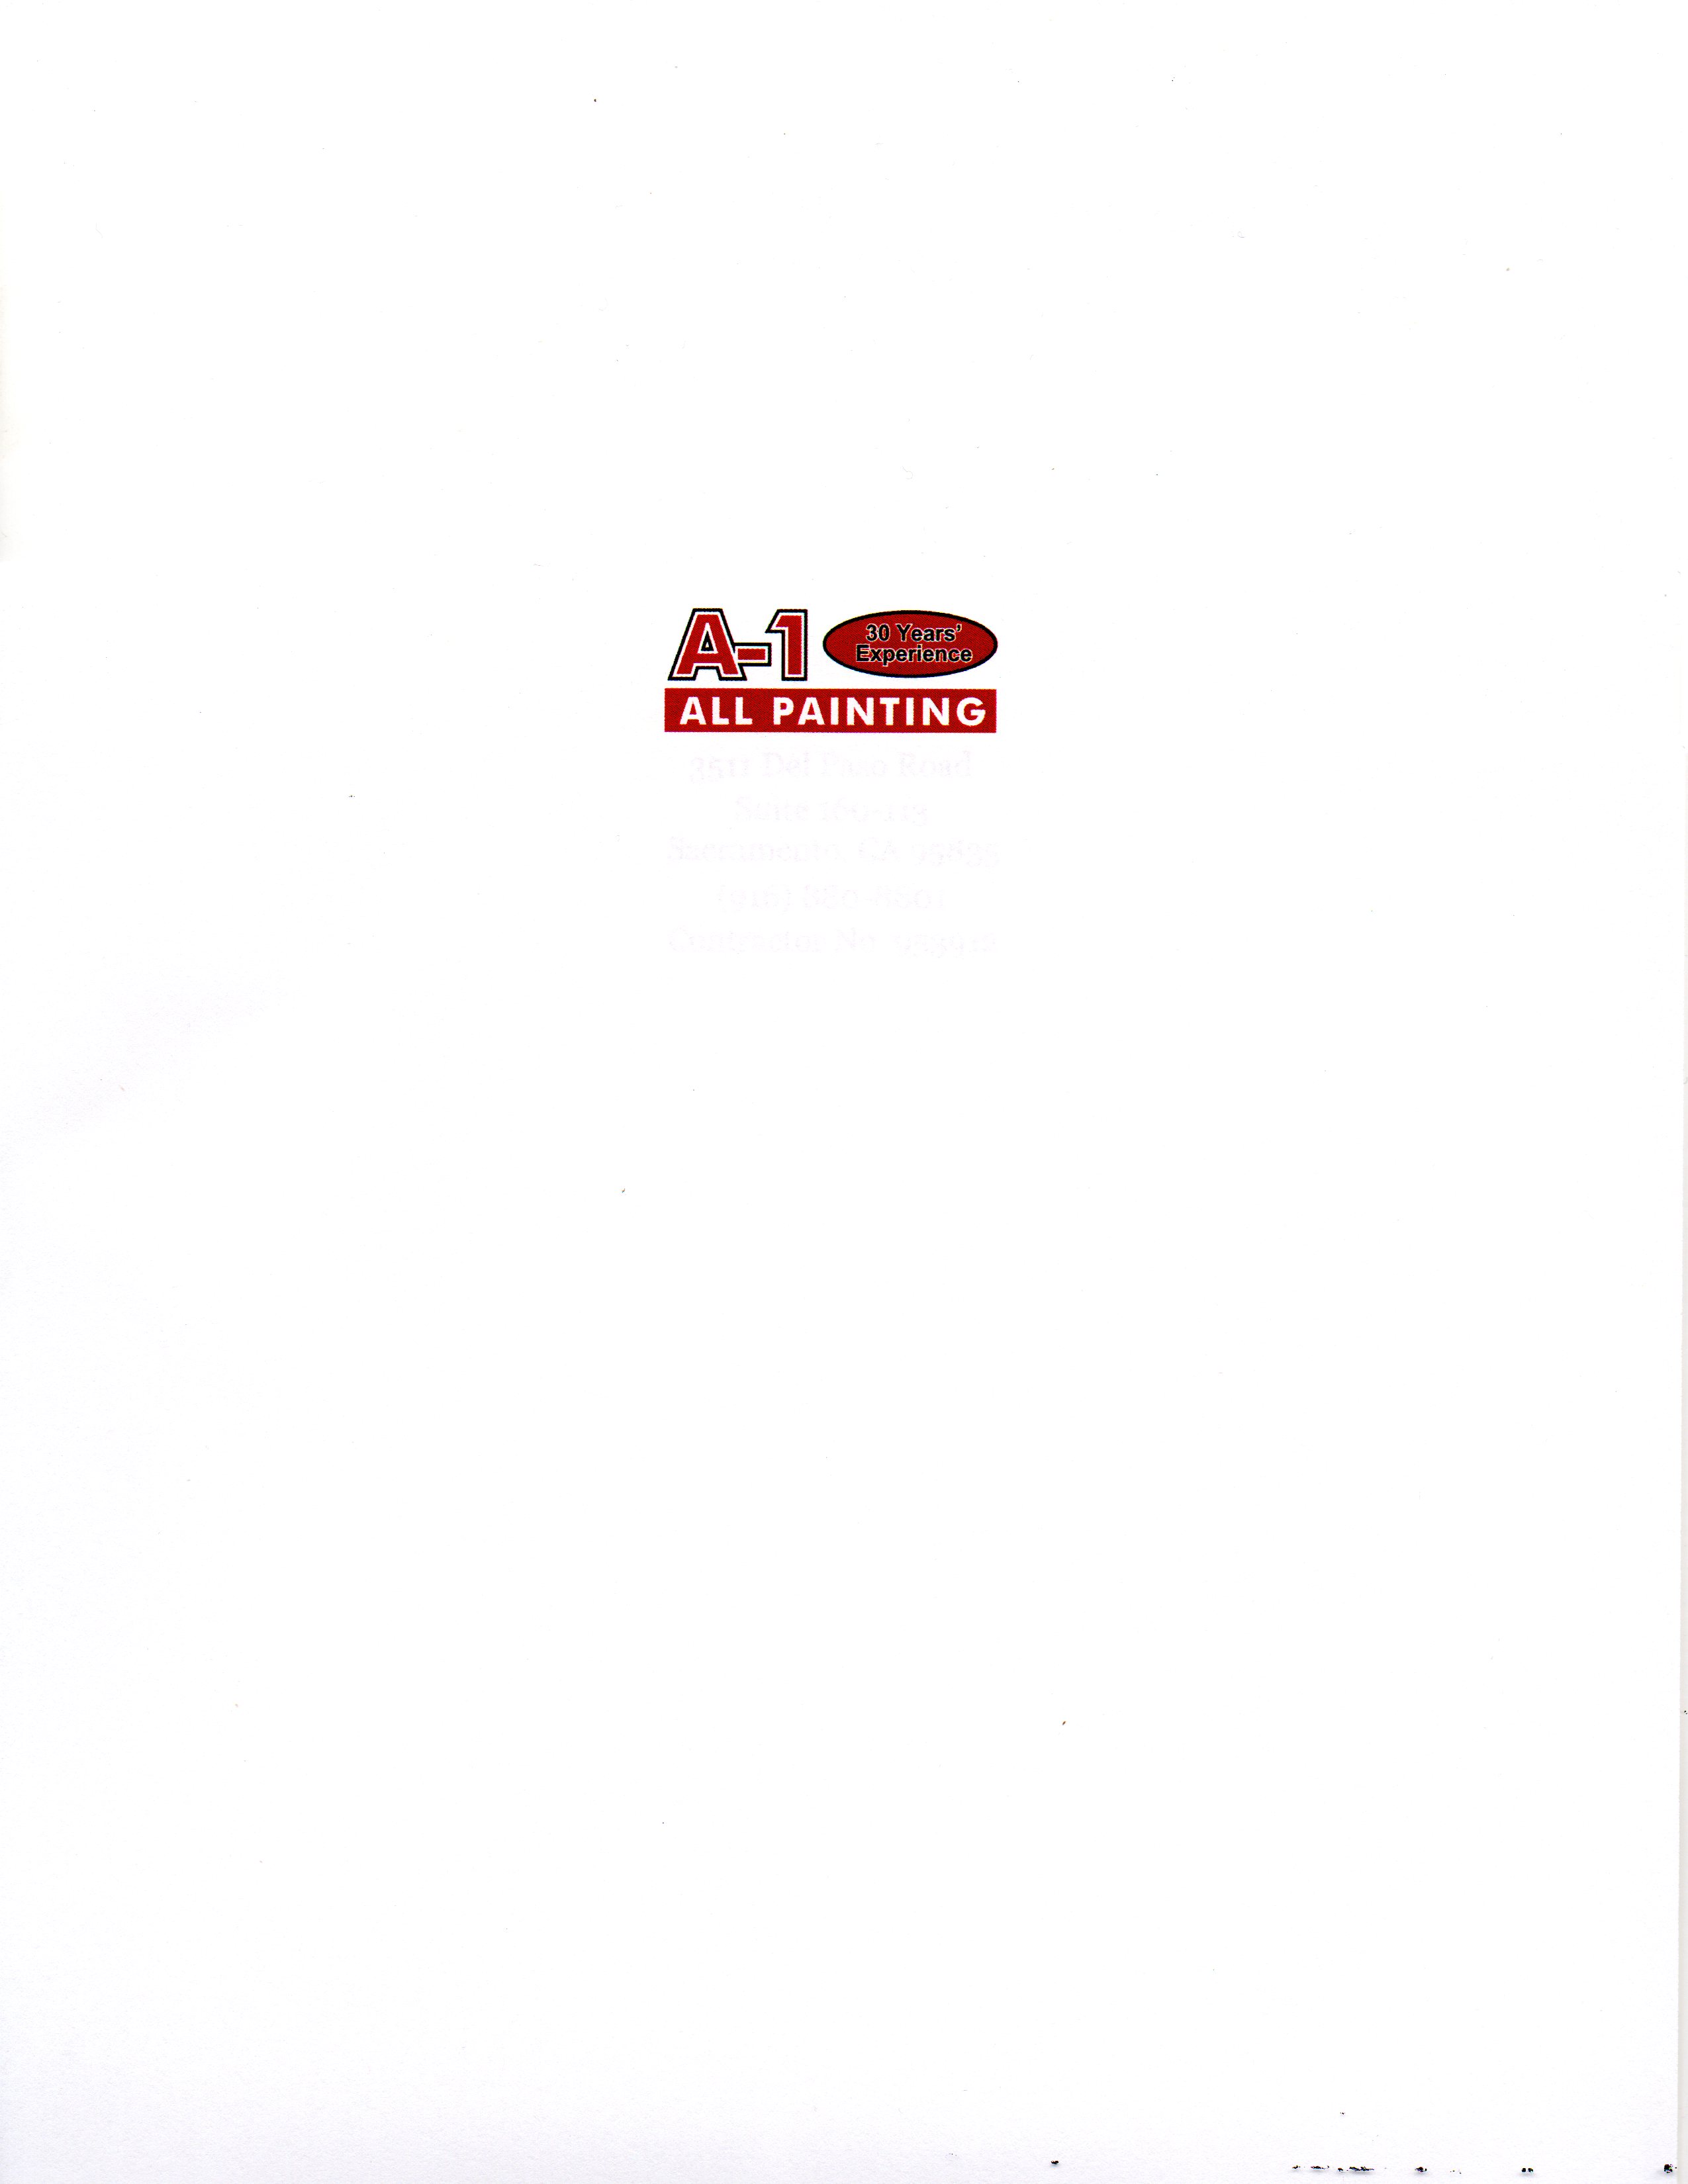 A-1 All Painting Logo